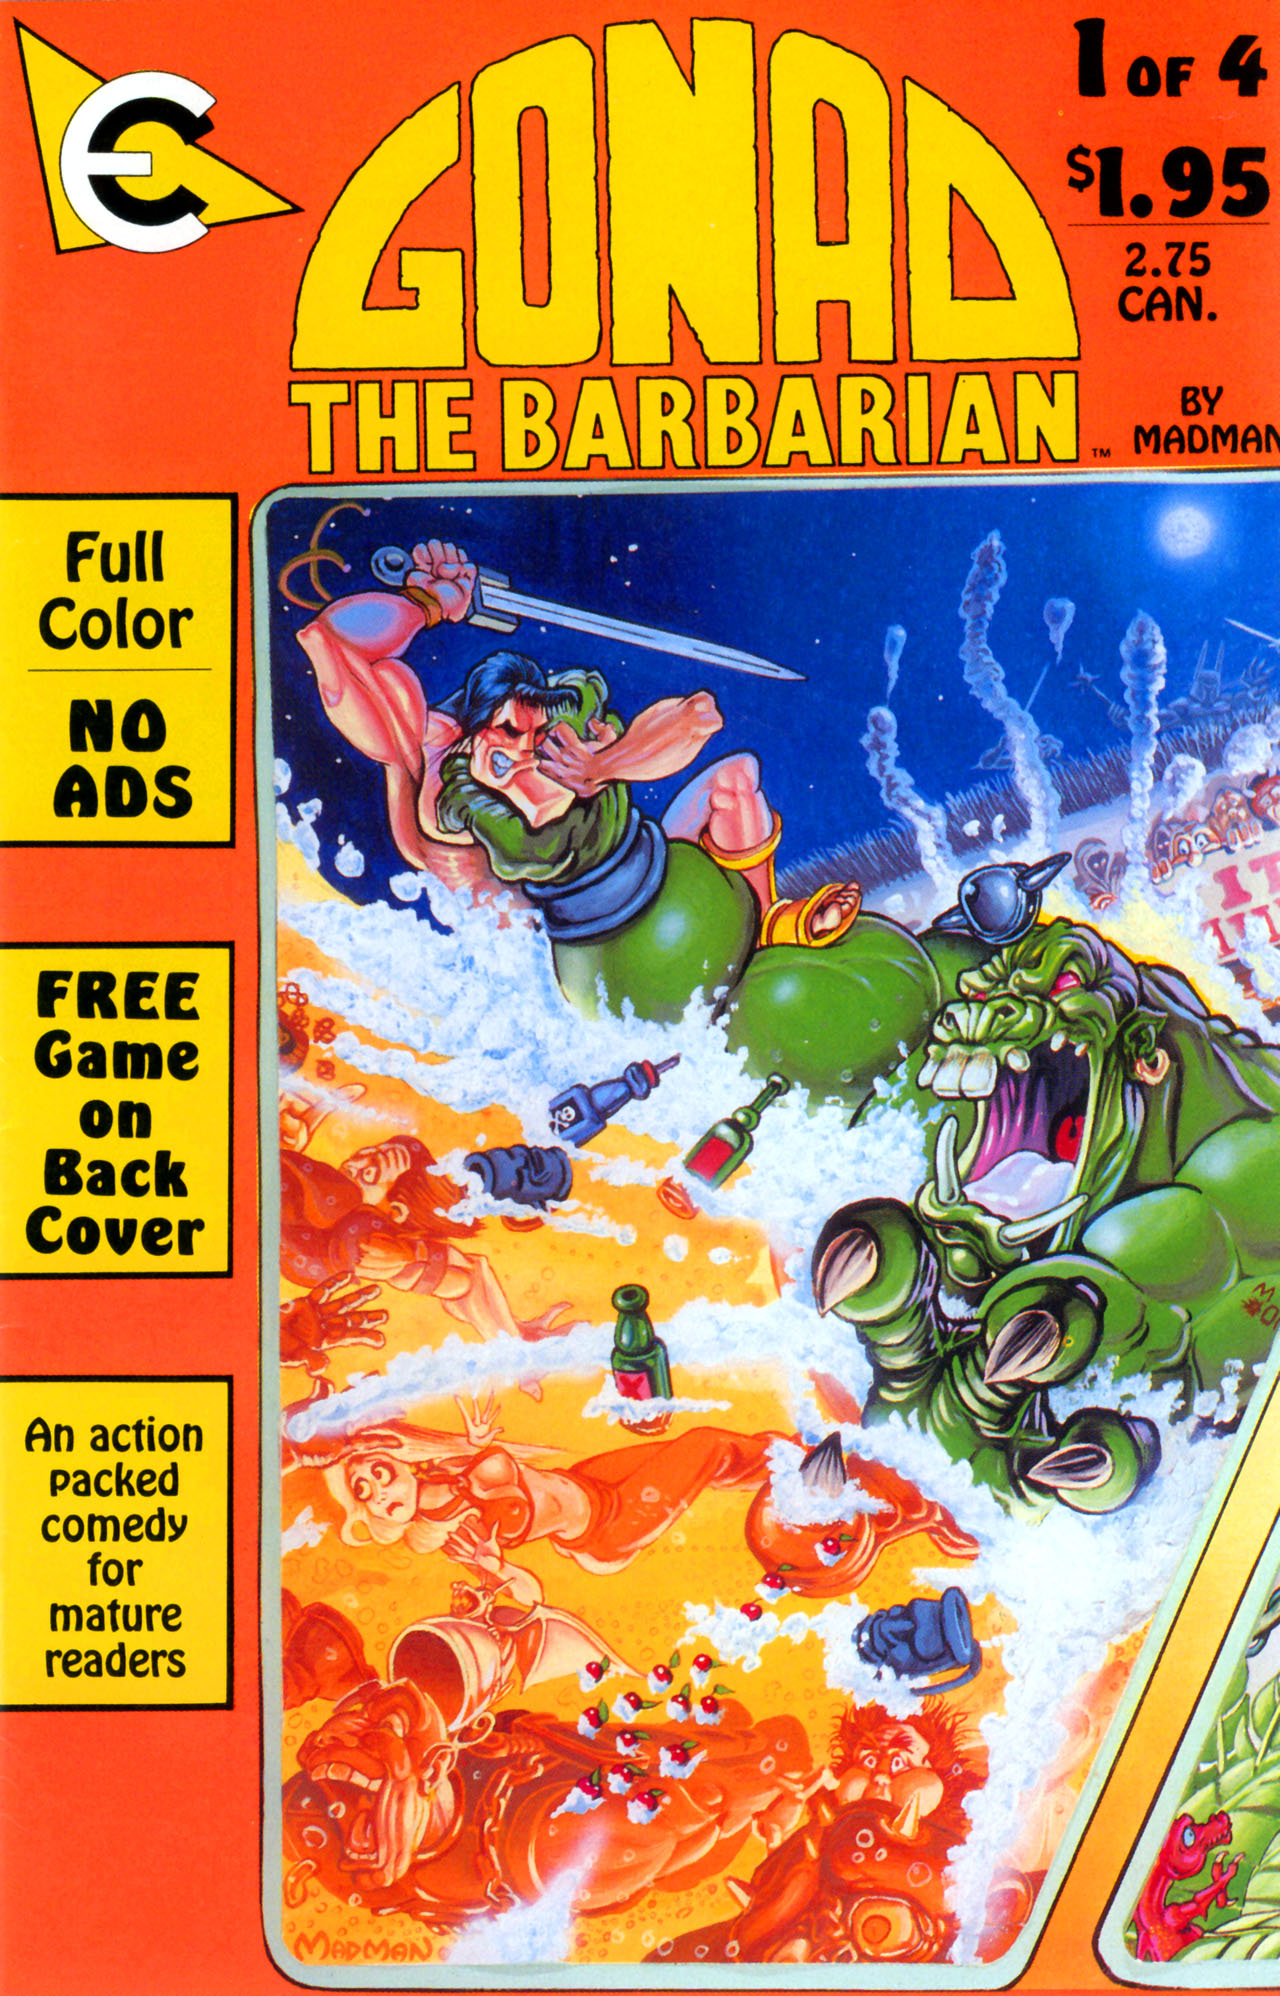 Read online Gonad the Barbarian comic -  Issue # Full - 1